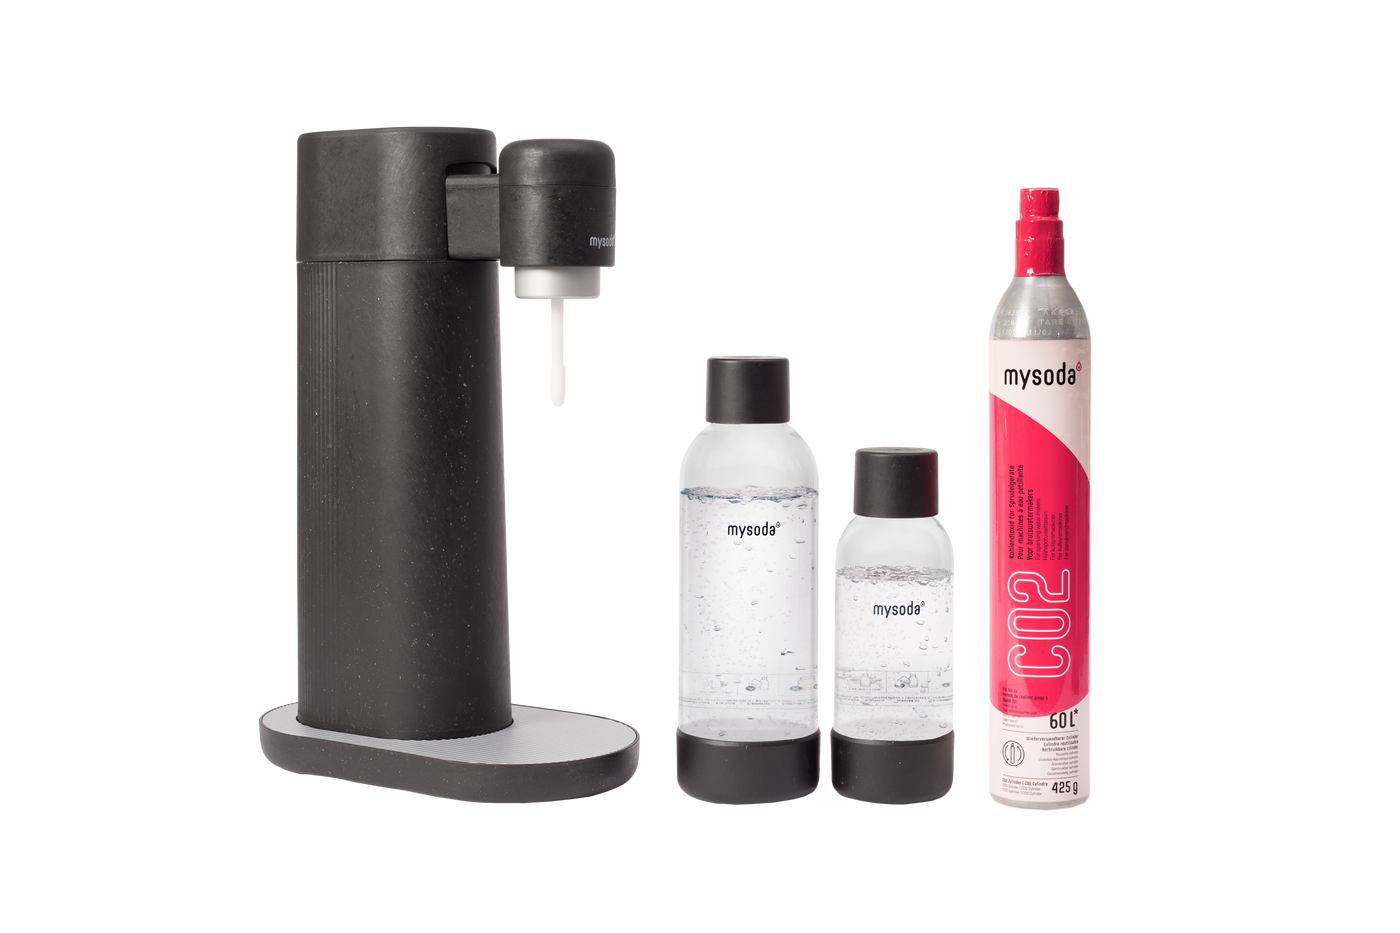 A black Toby sparkling water maker with bottle and co2 cylinder